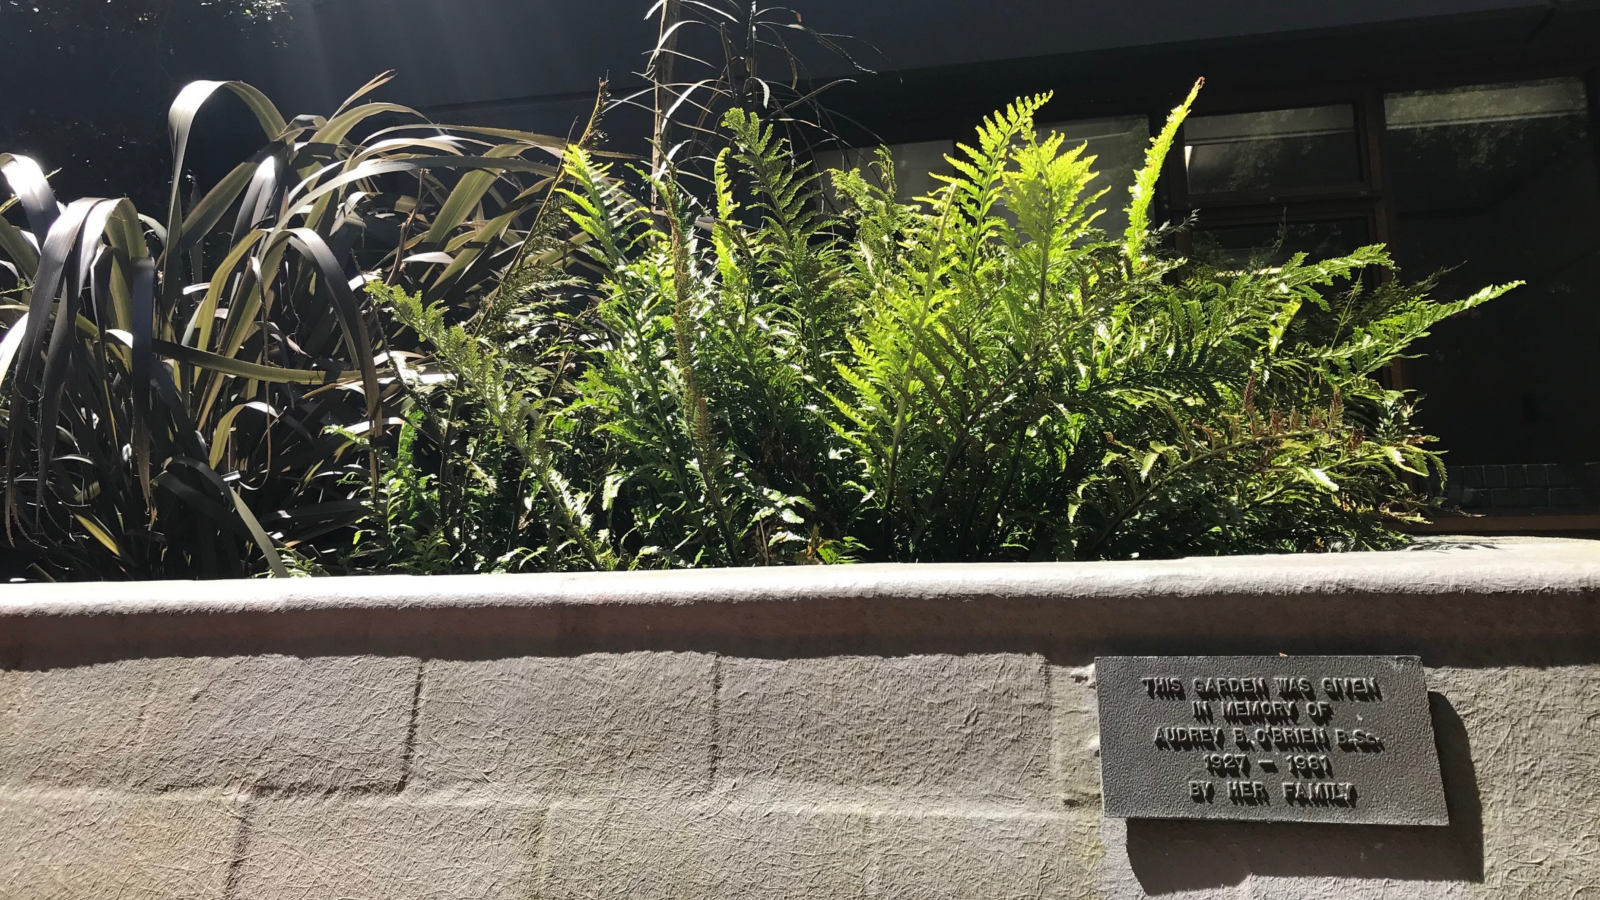 garden with ferns and brick exterior, with plaque which reads 'this garden was given in memory of Audrey B. O'Brien B. Sc. 1927-1981 by her family